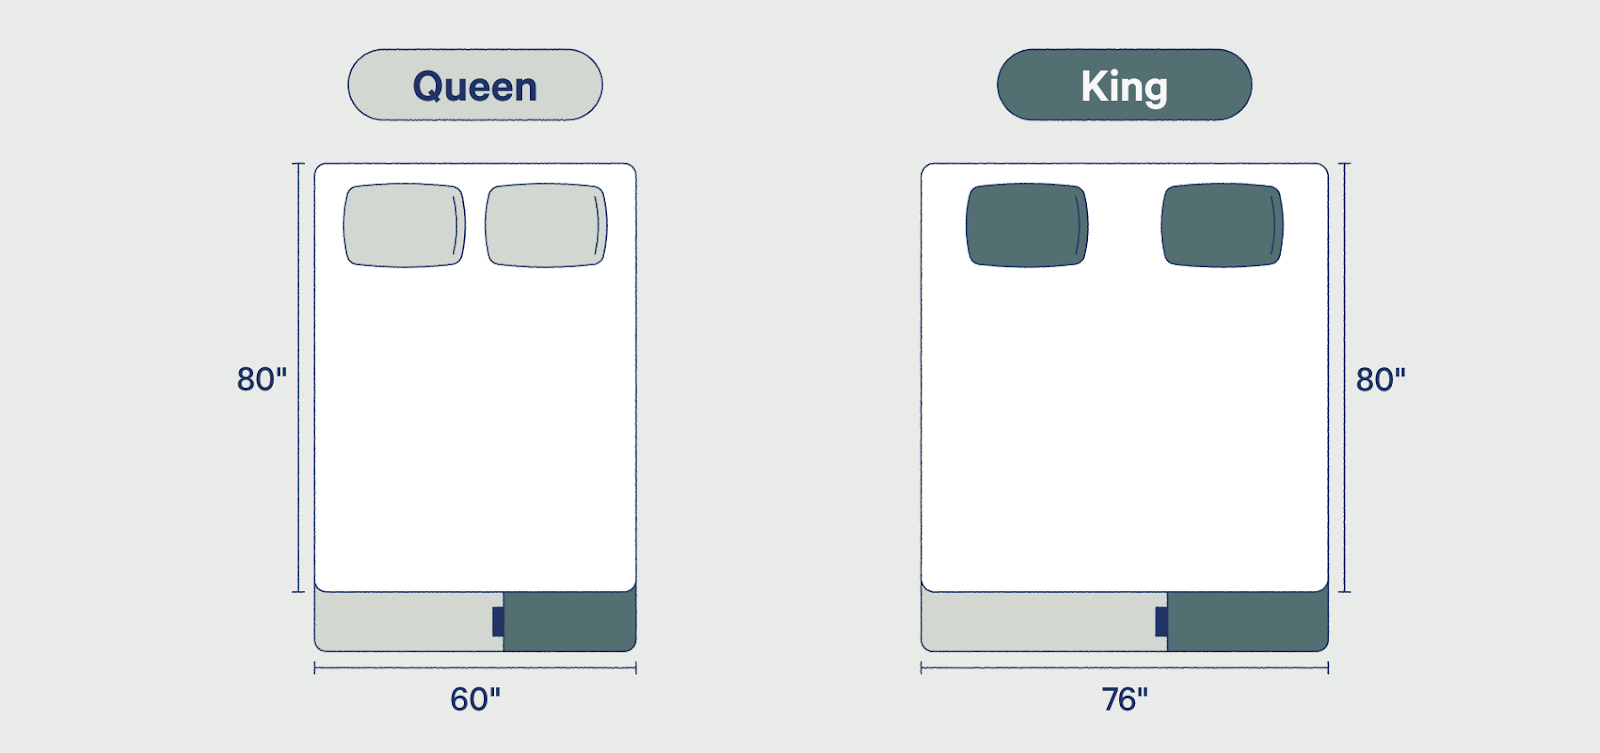 King Vs Queen Bed Size And Comparison, Is There A Wider Bed Than King